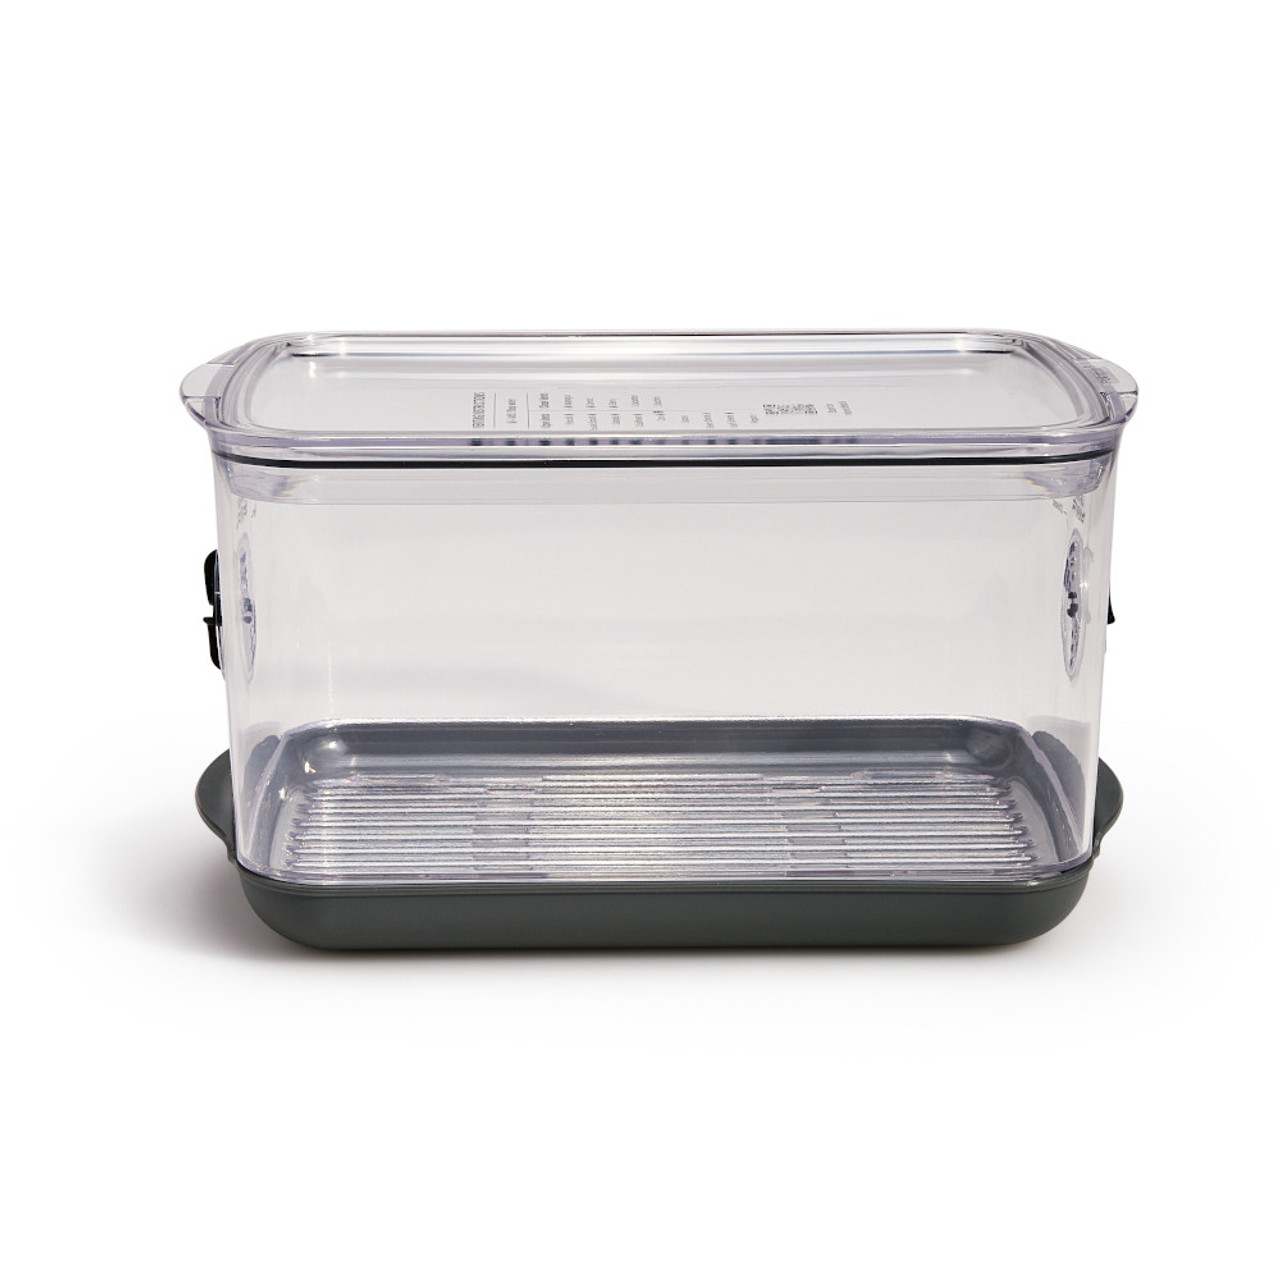 ProKeeper+ Produce Storage Container - King Arthur Baking Company